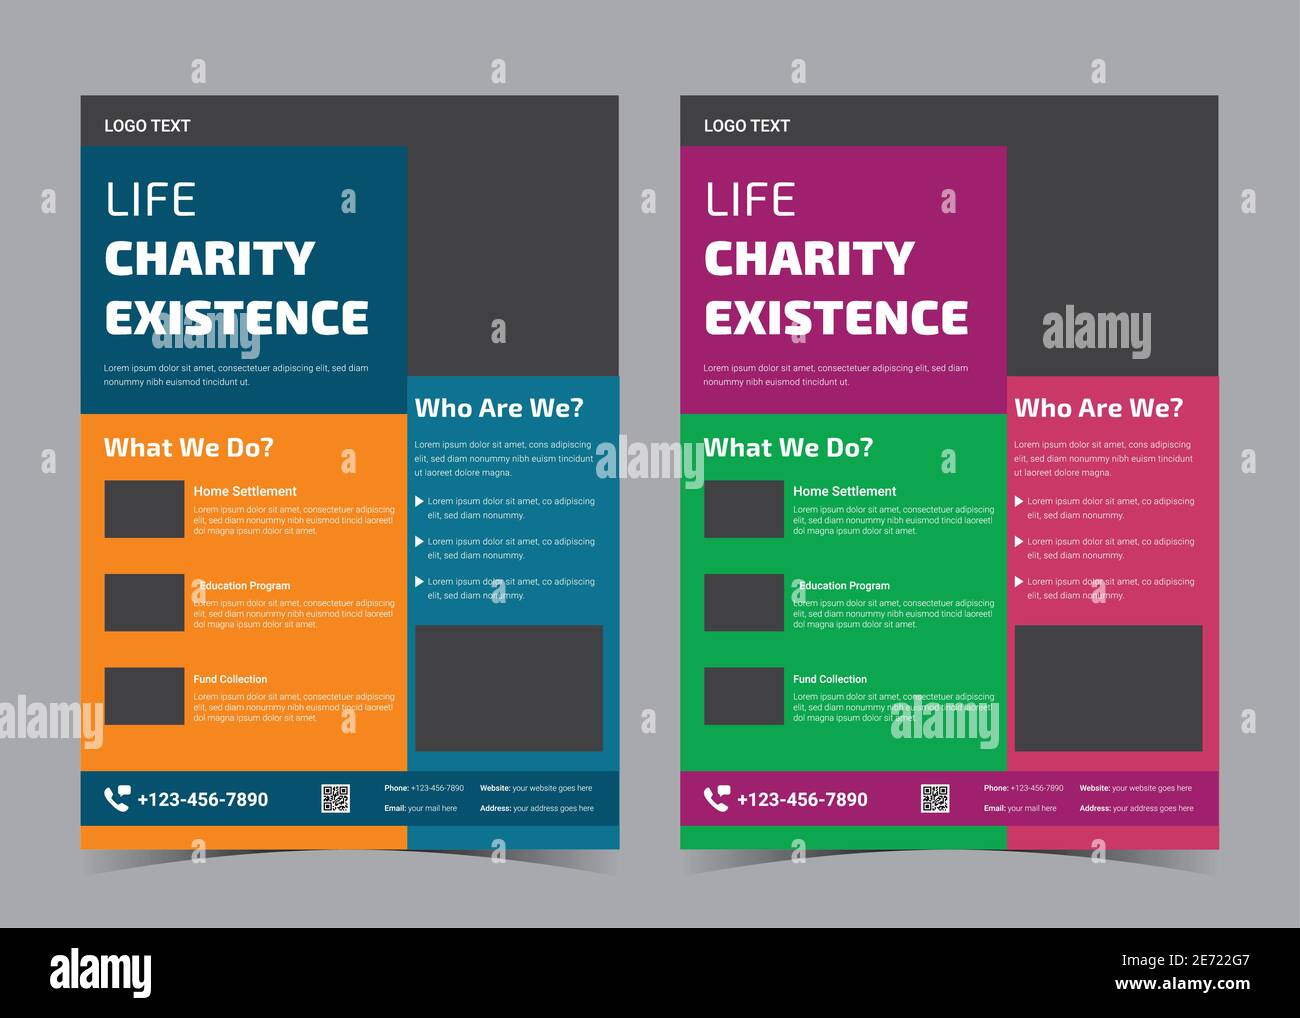 charity donation flyer template. donation promotion ad. food collection Stock Vector